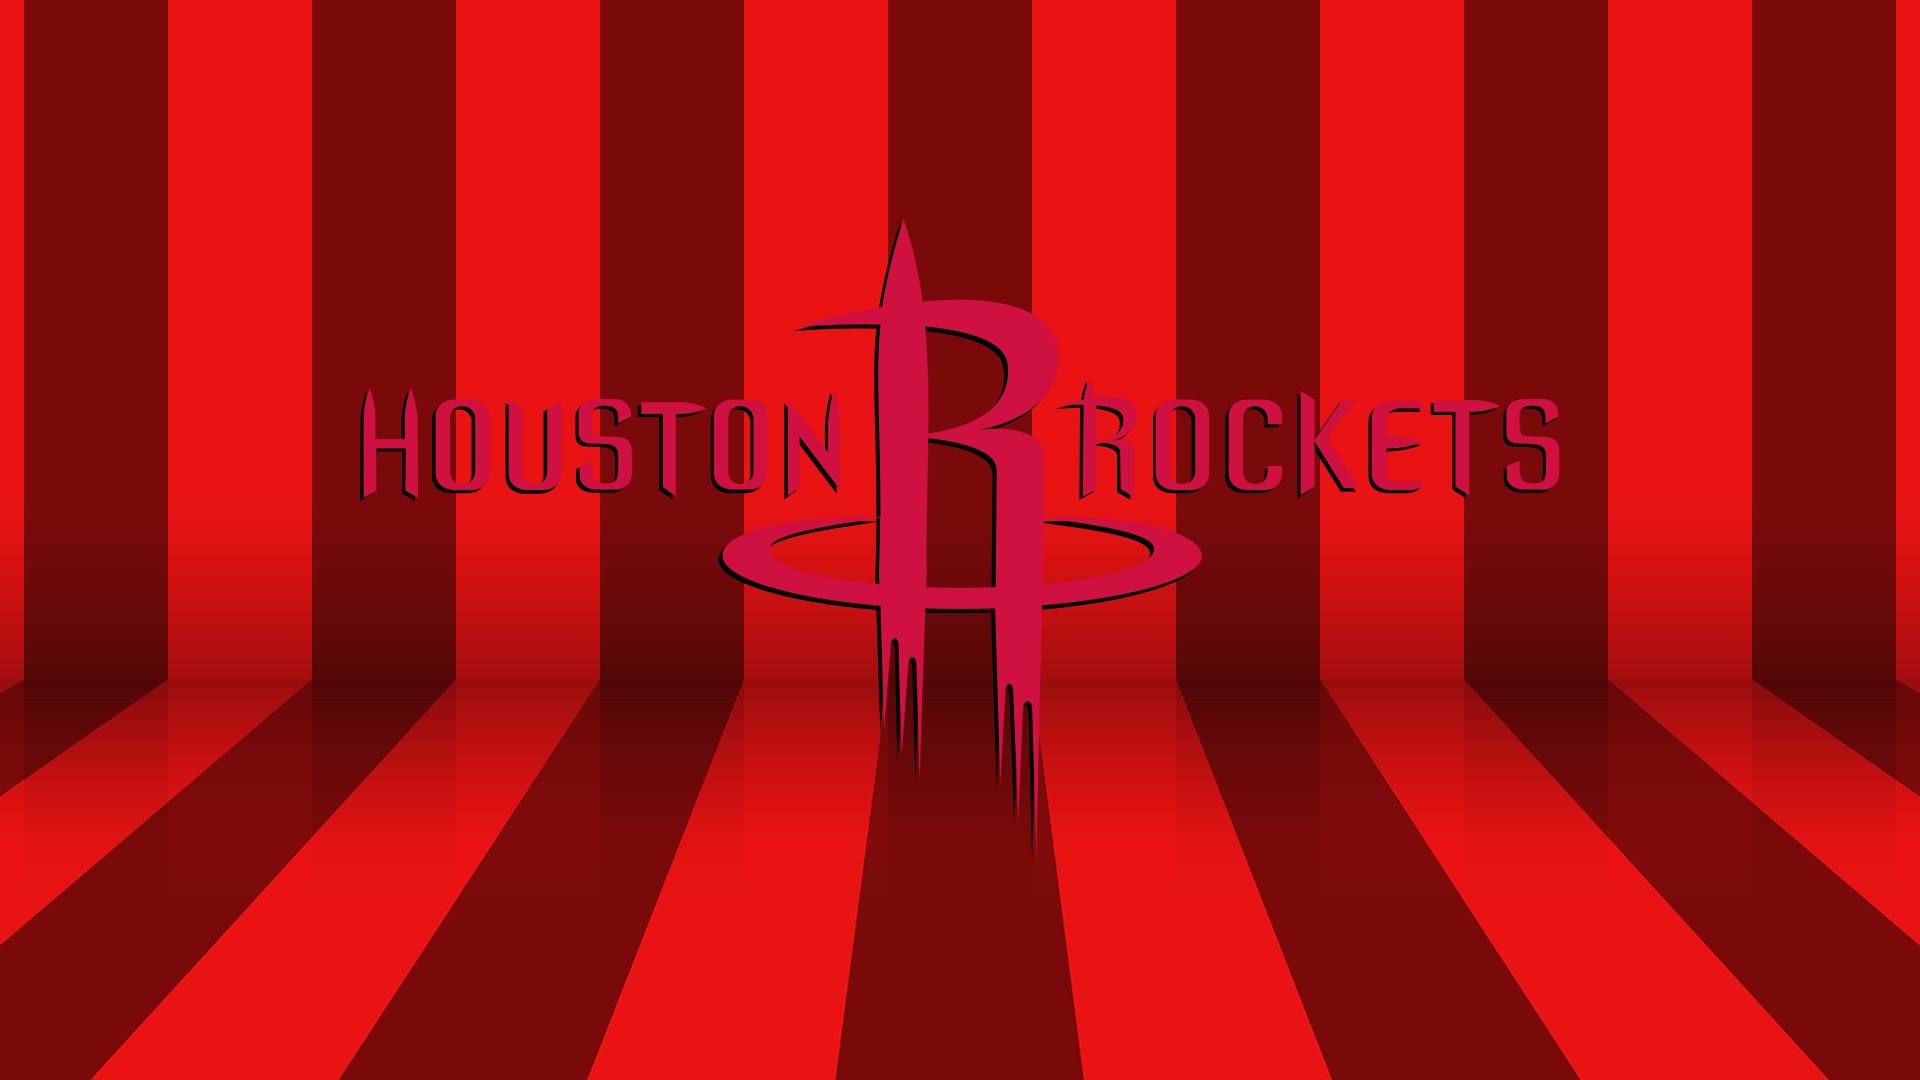 Backgrounds Houston Rockets HD with image dimensions 1920x1080 pixel. You can make this wallpaper for your Desktop Computer Backgrounds, Windows or Mac Screensavers, iPhone Lock screen, Tablet or Android and another Mobile Phone device